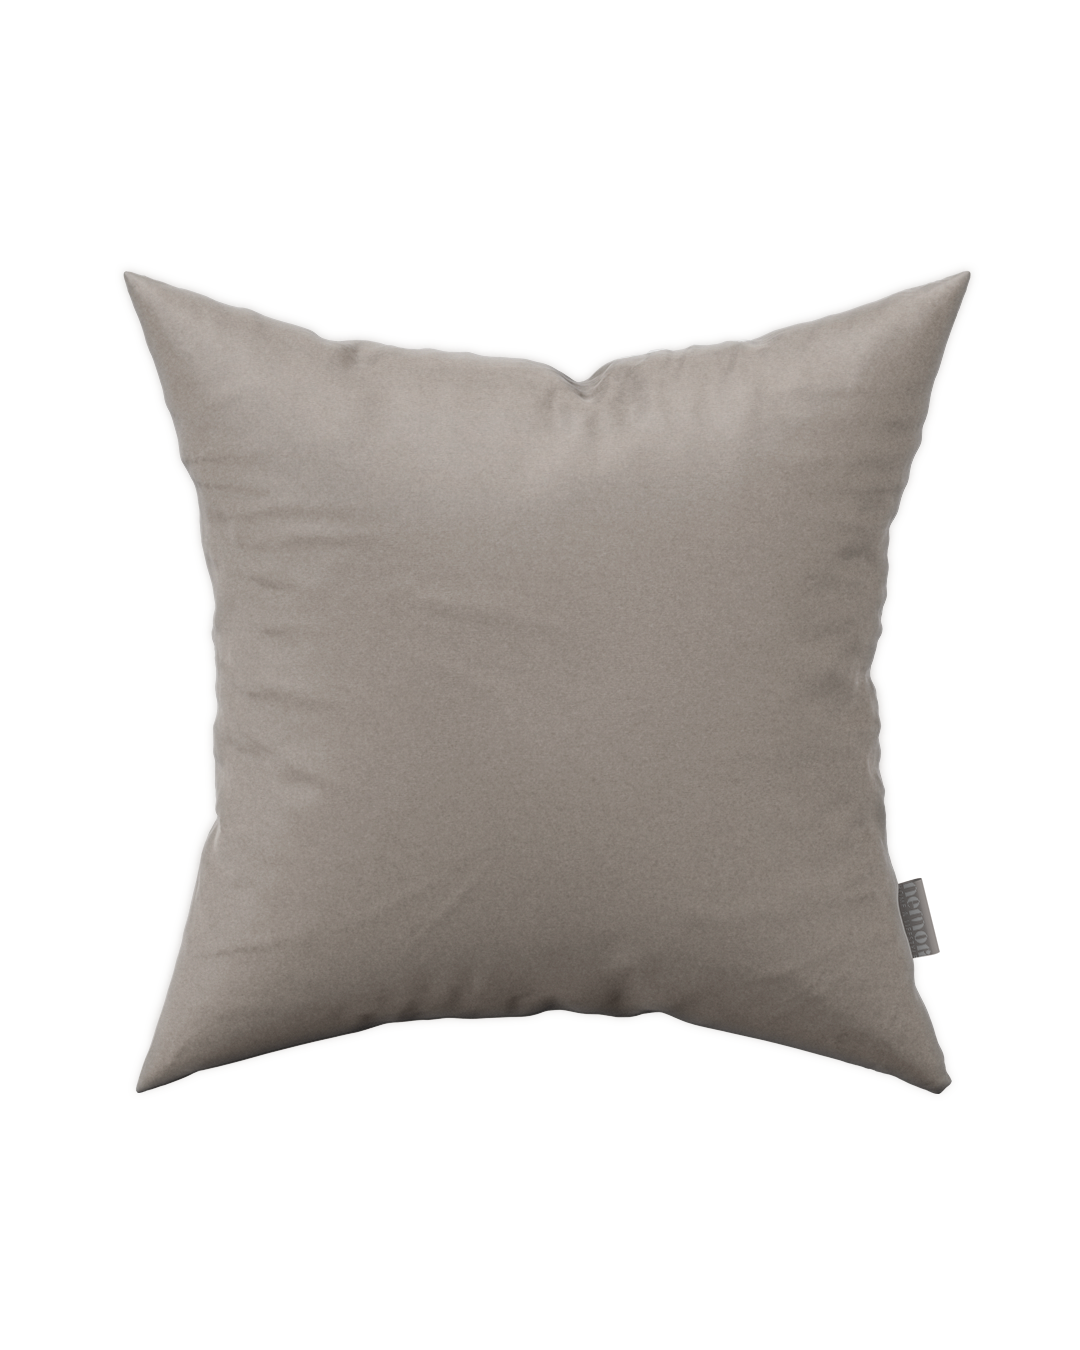 Alpin 01 Greige Pillow Cover